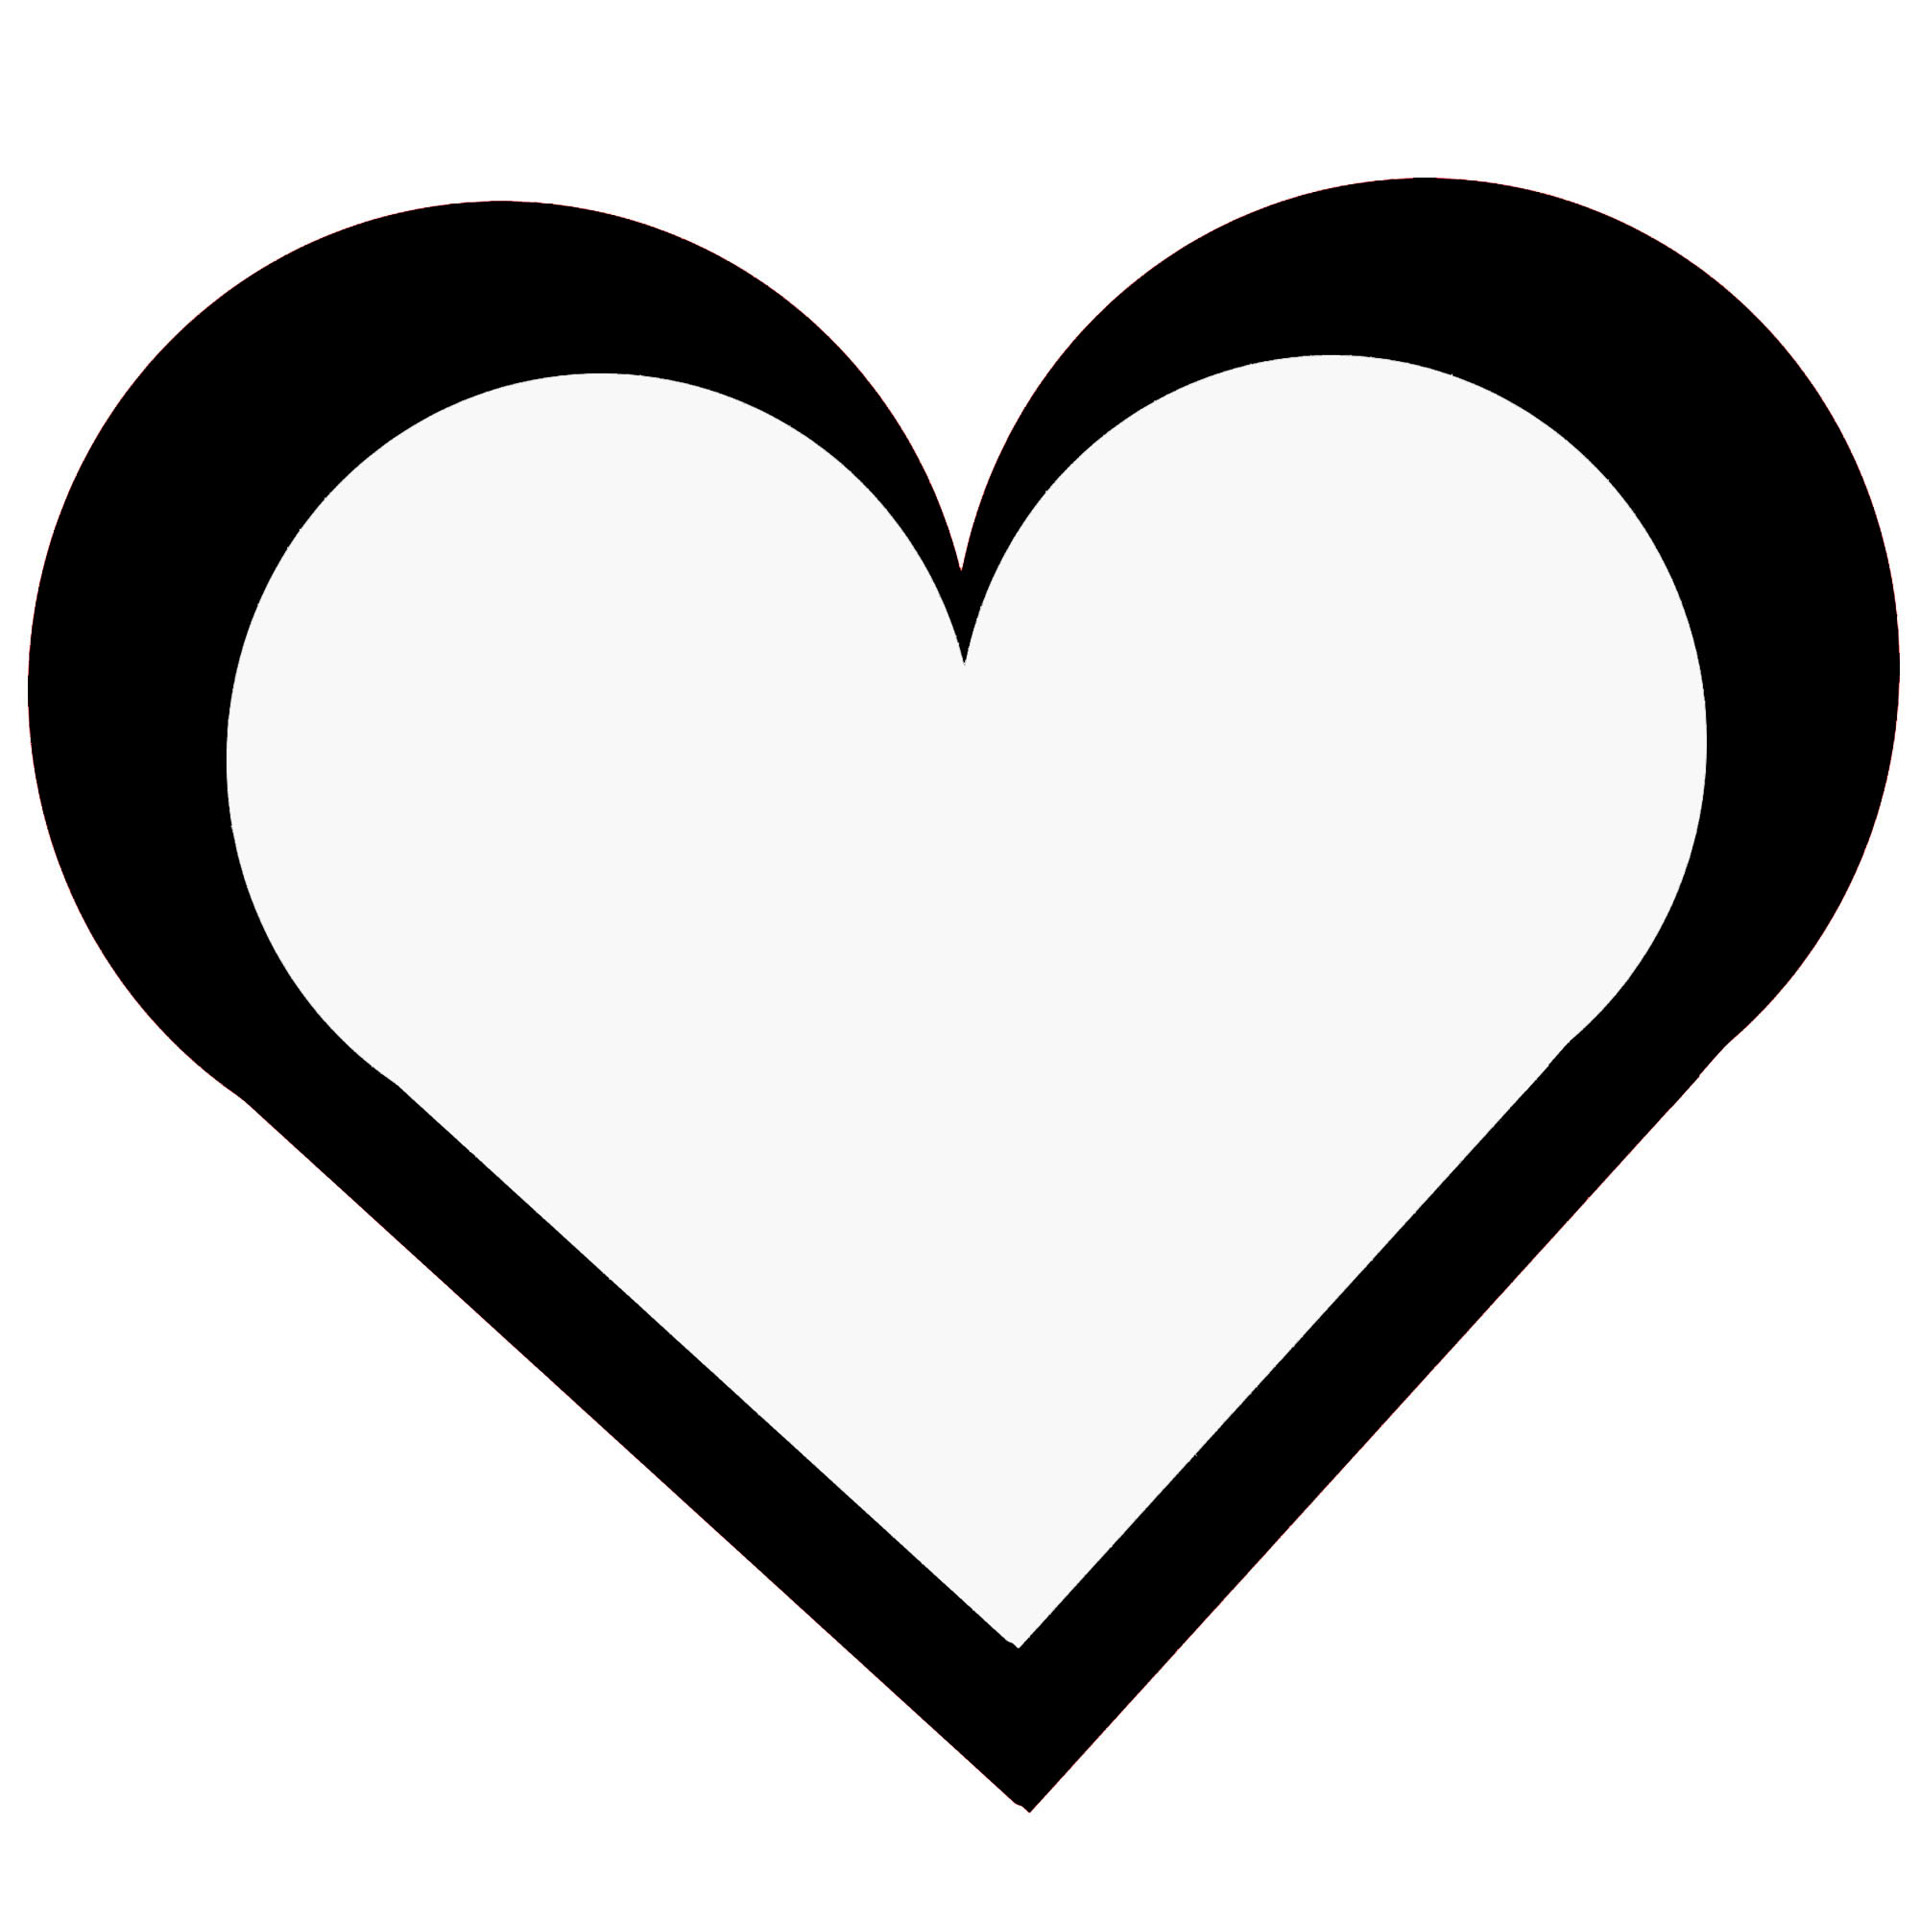 Heart Shapes To Print - ClipArt Best